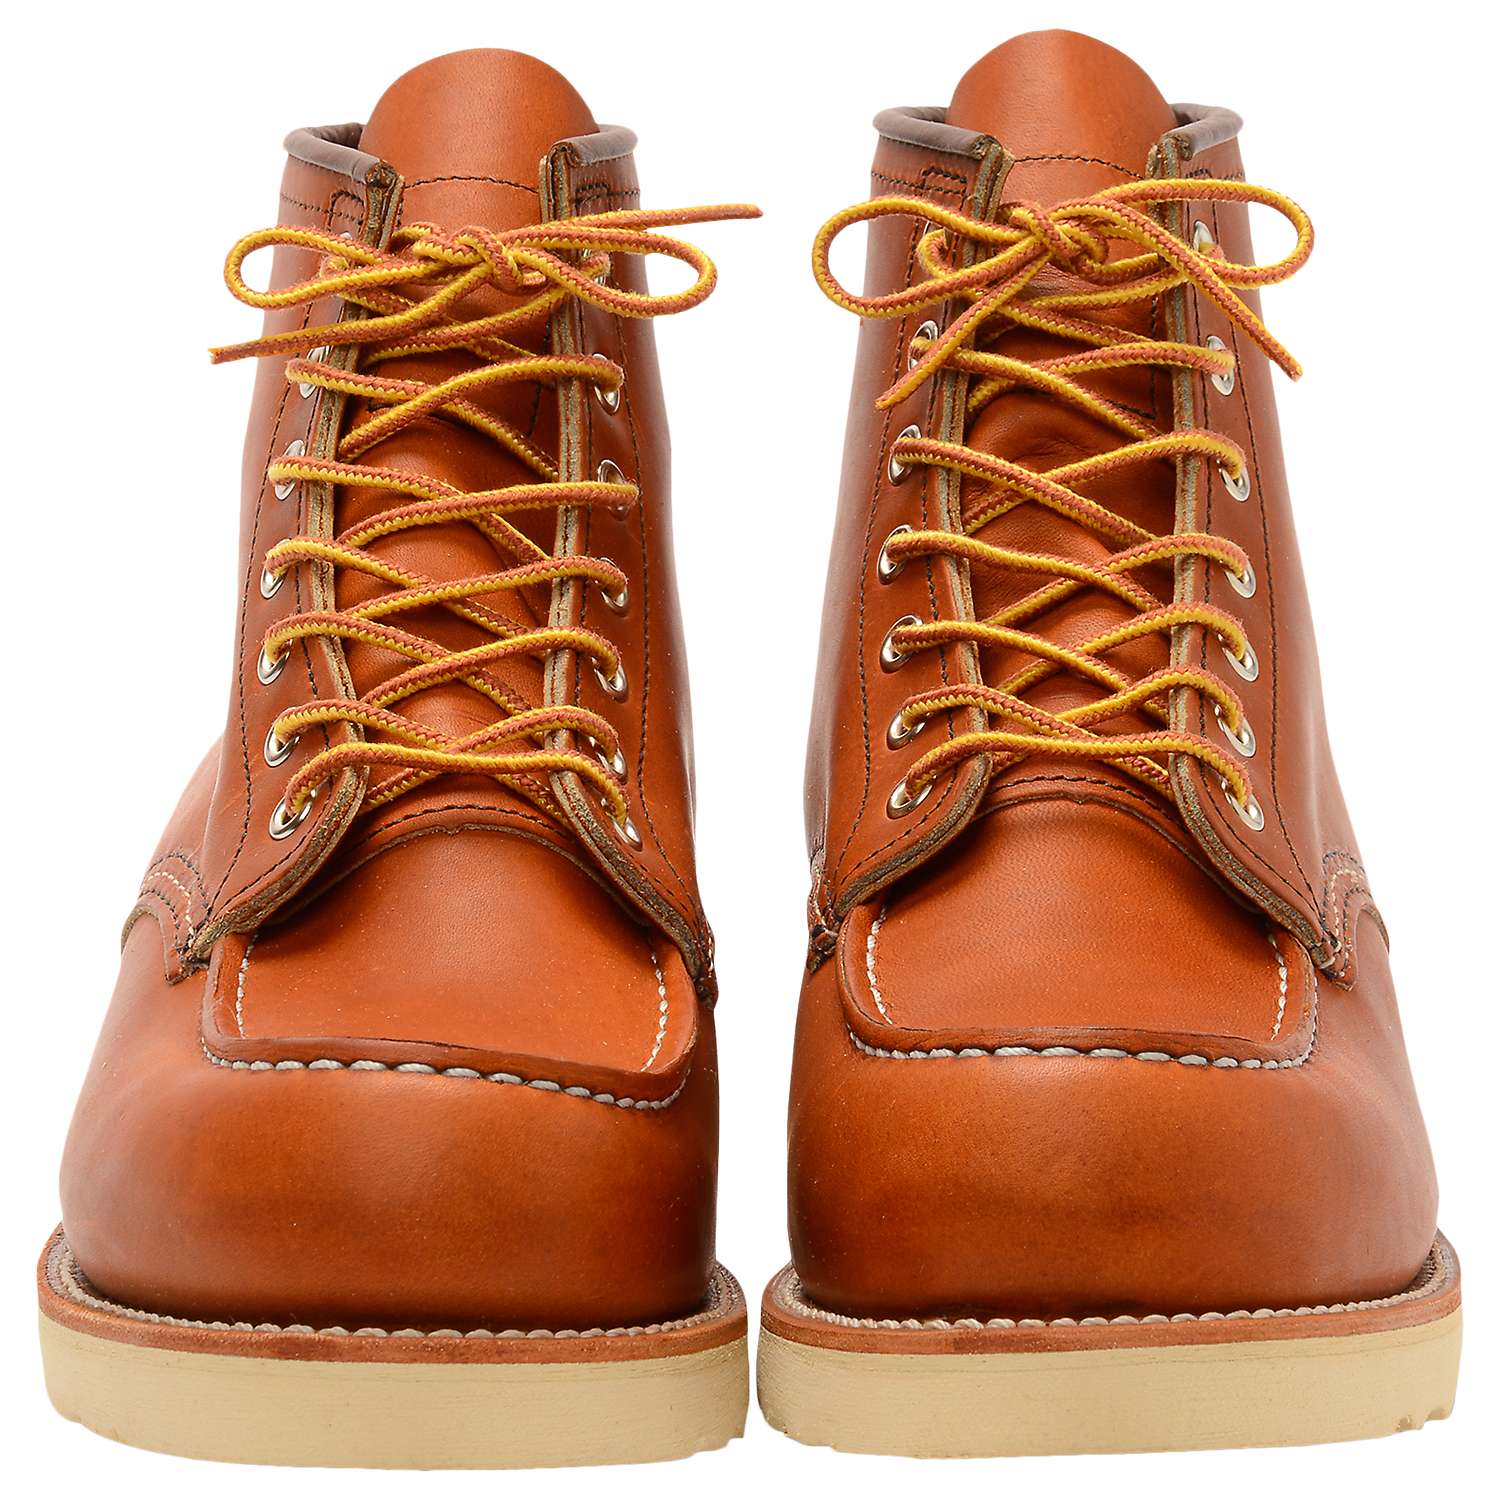 Buy Red Wing 875 Moc Toe Boot Online at johnlewis.com